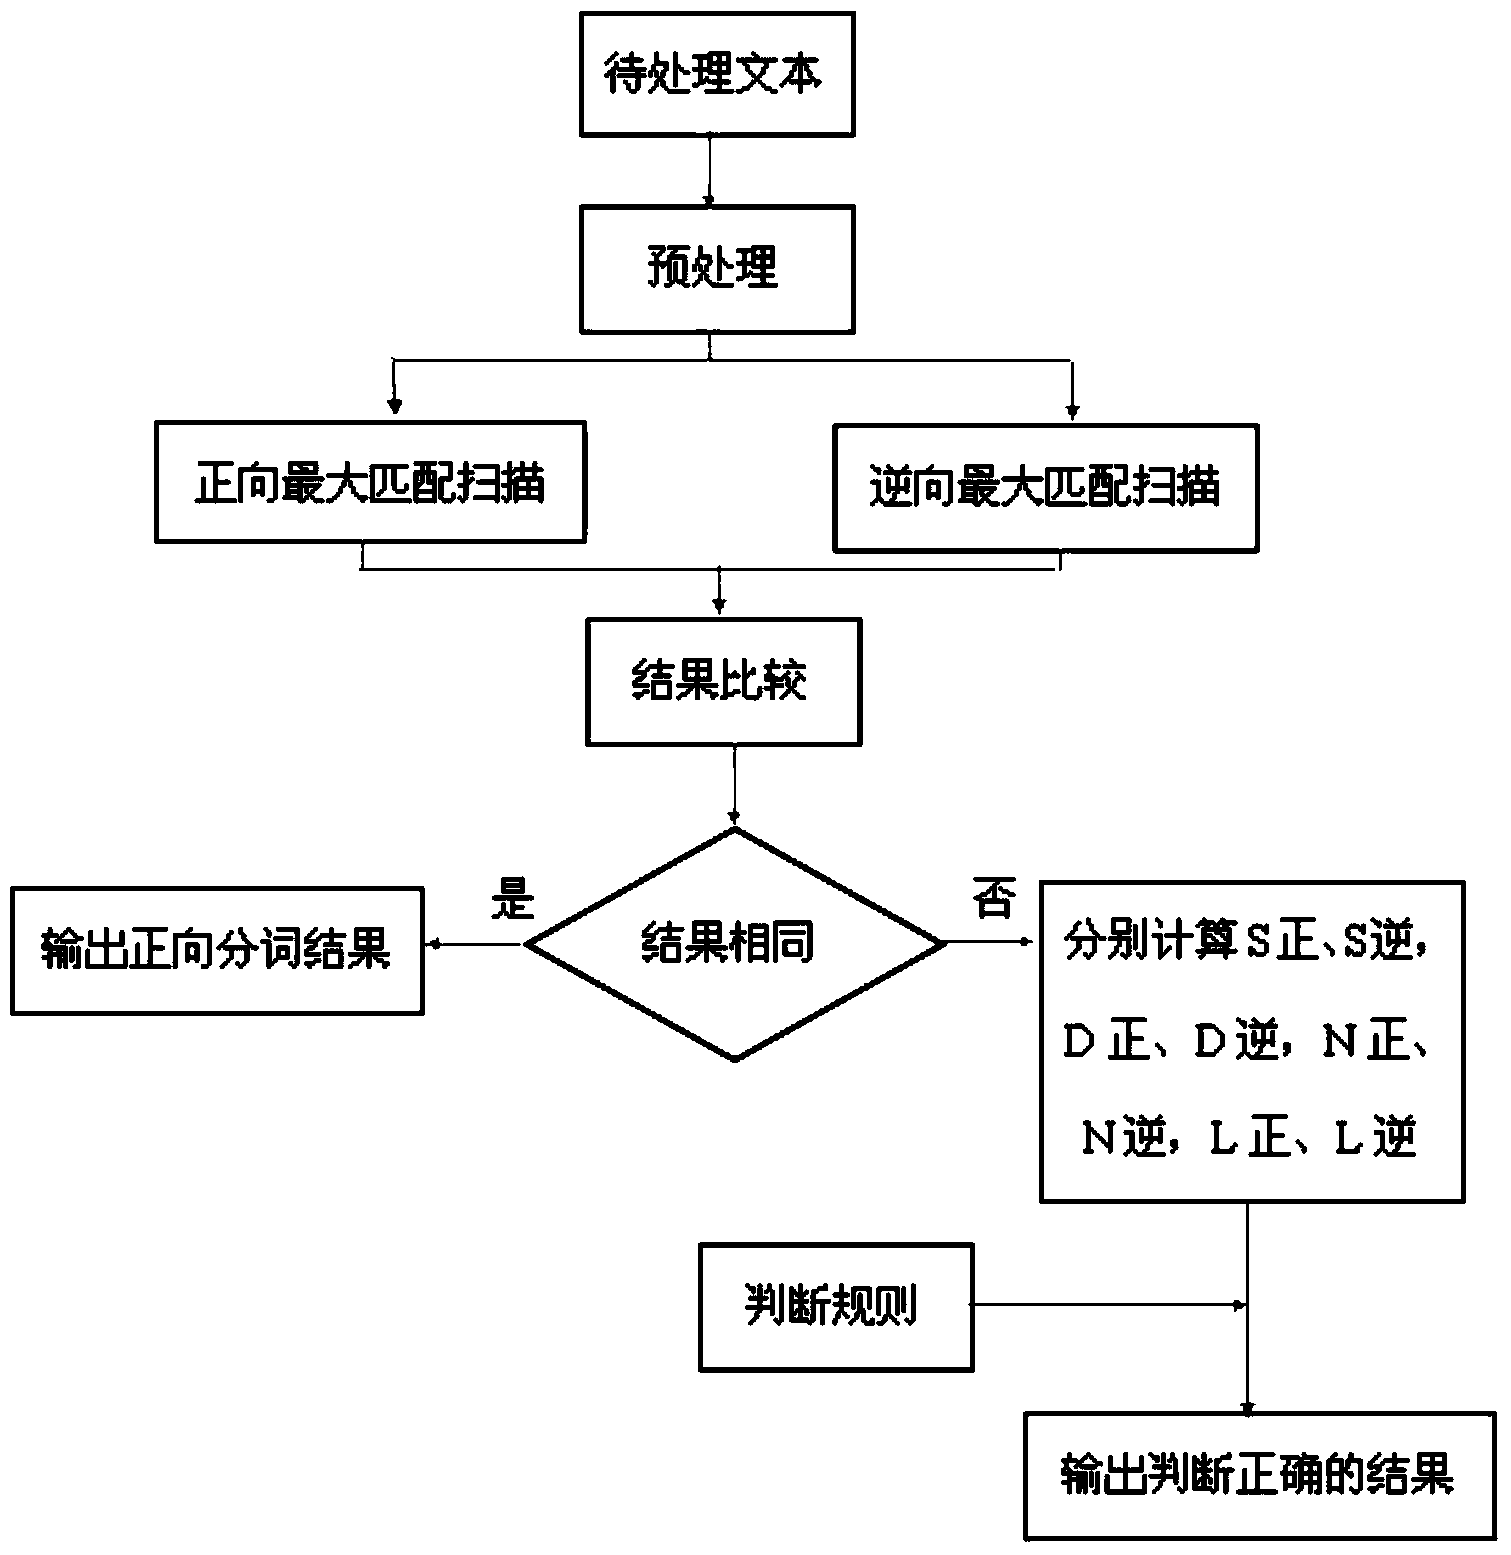 Chinese word segmentation method based on hash table dictionary structure